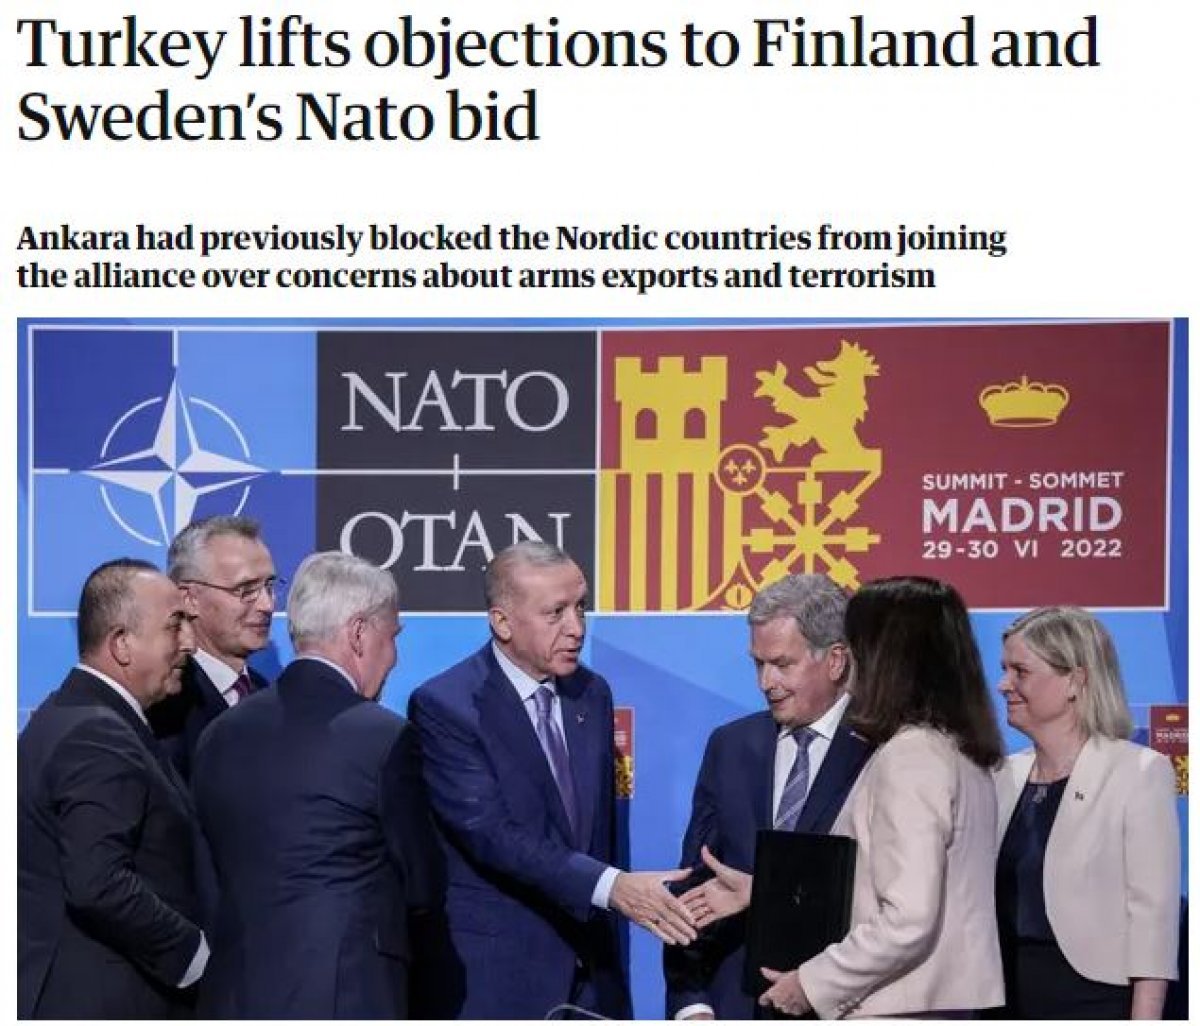 Joint declaration signed by Turkey, Finland and Sweden in Madrid #7